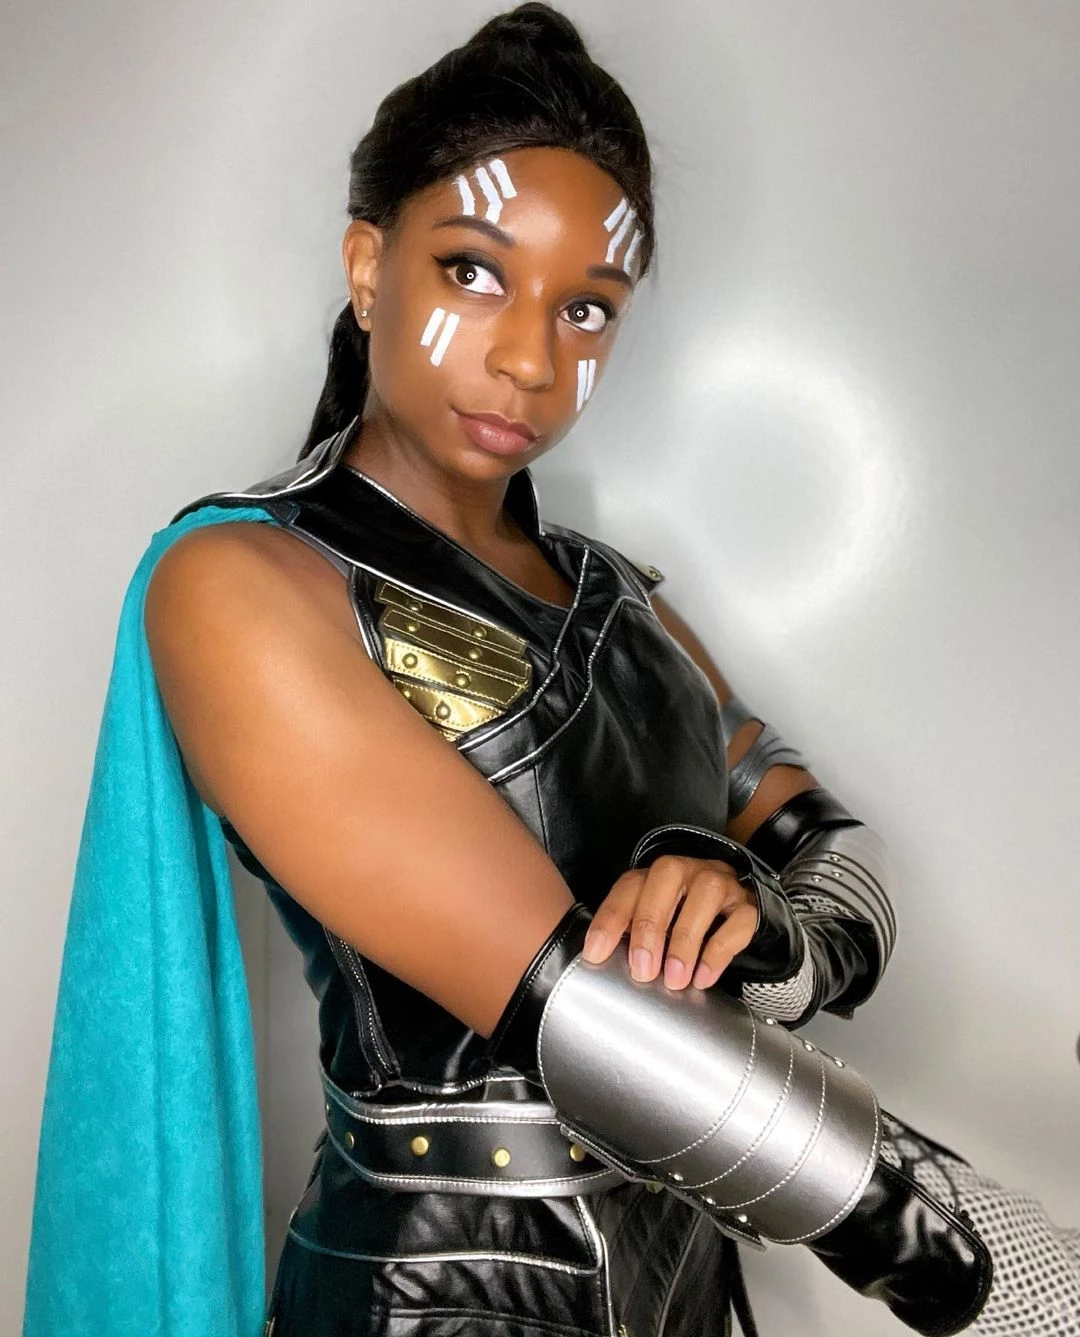 Here’s The Cosplayer As Valkyrie, Another MCU Heroine